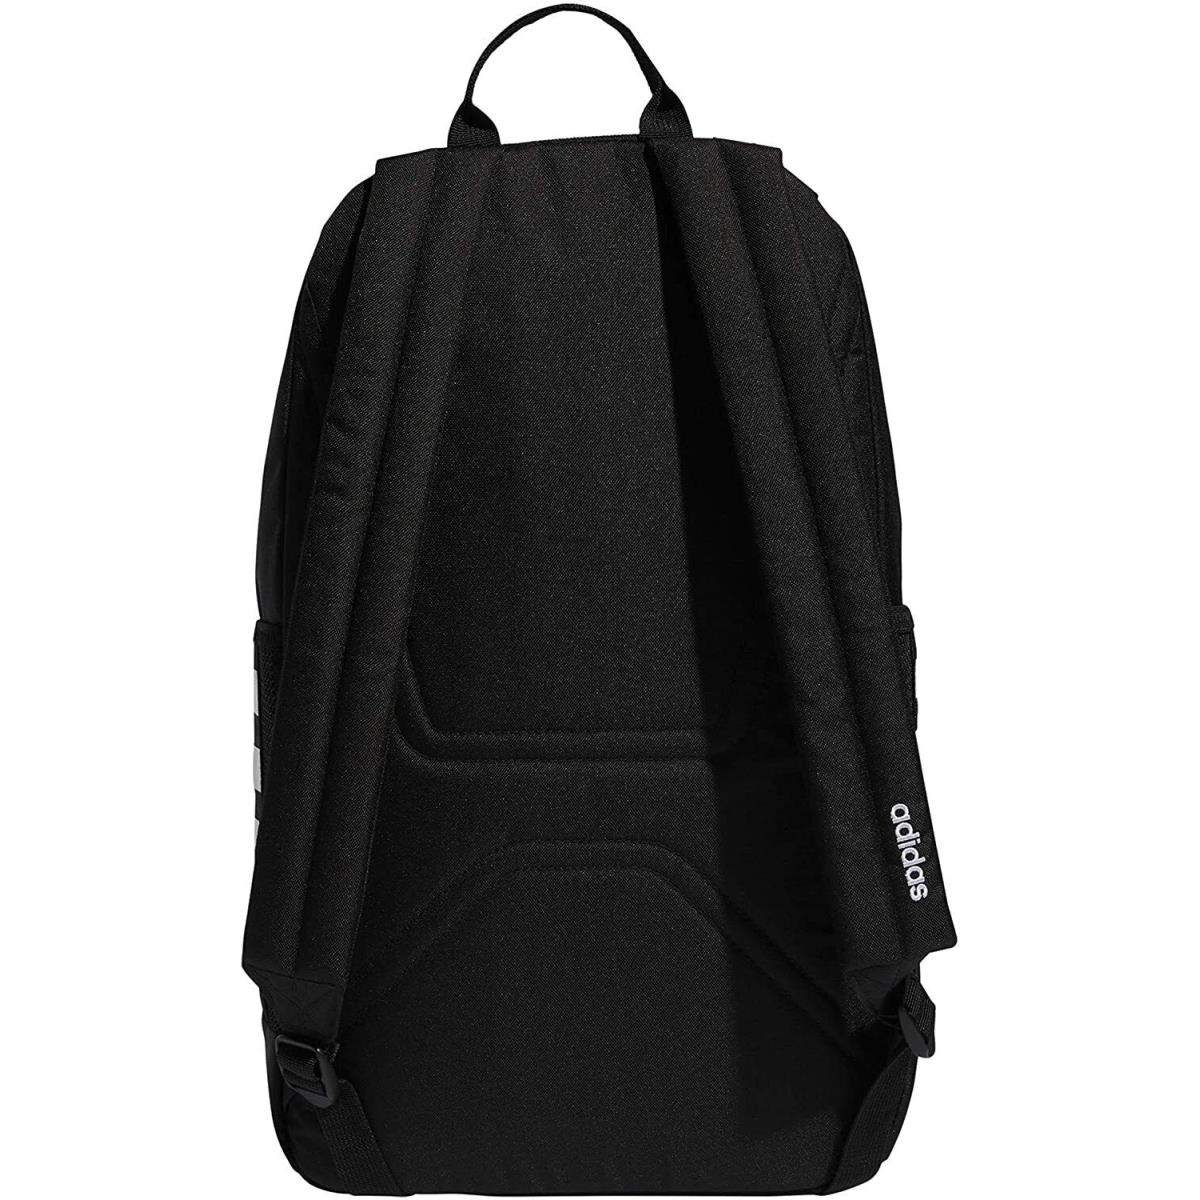 Adidas Classic 3-Stripes 3 Backpack